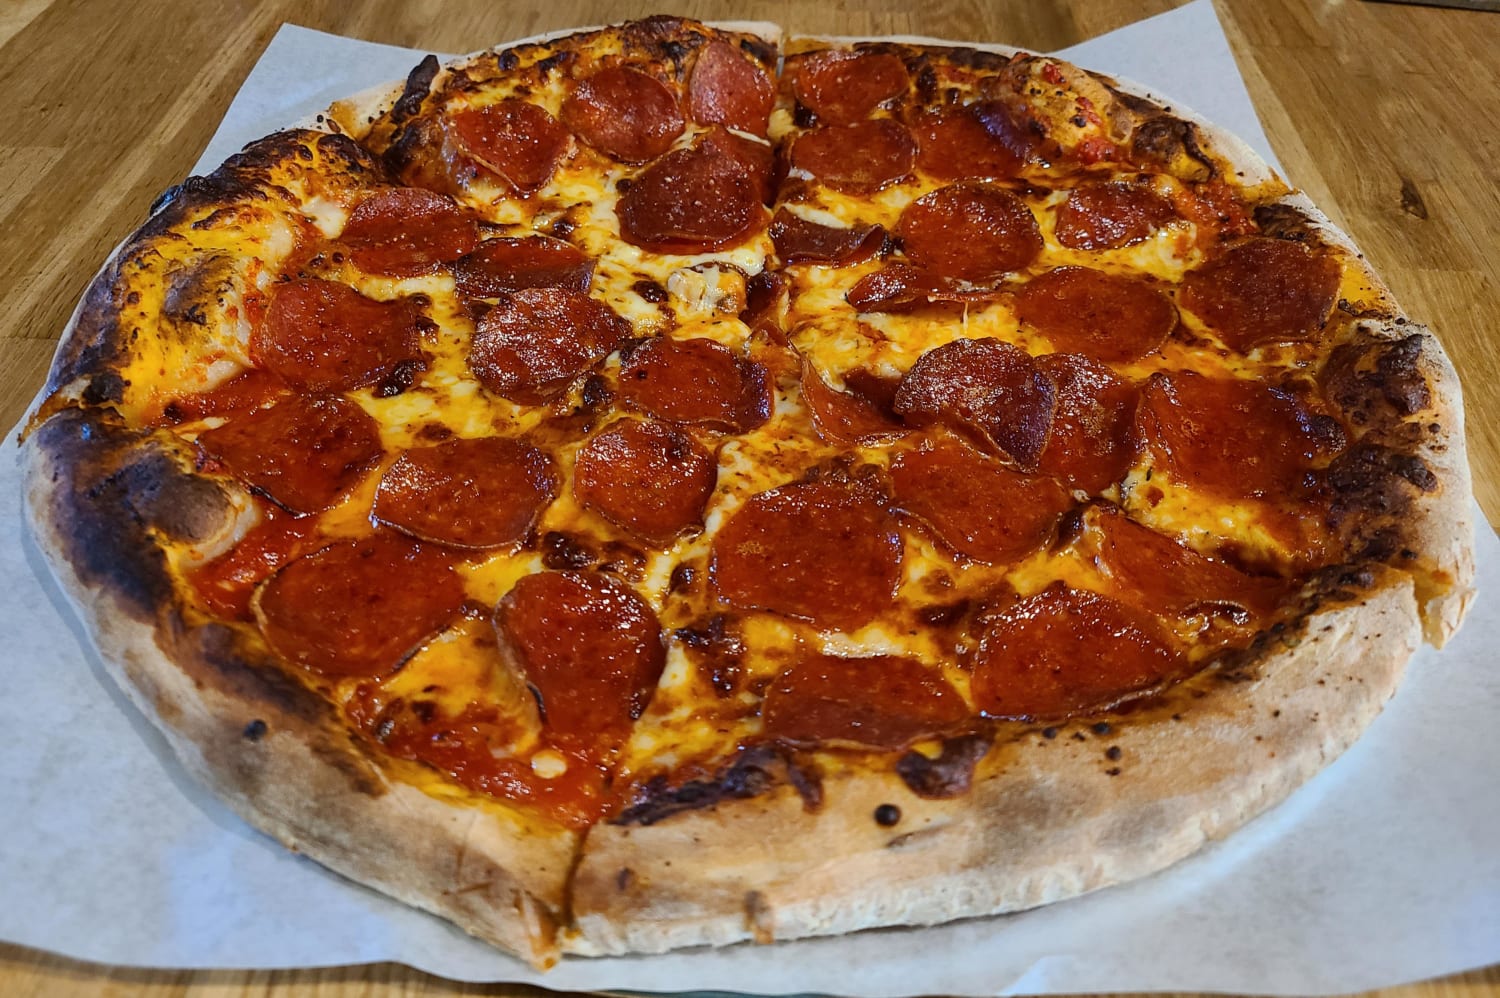 Pepperoni pizza from a local brewery down the street from my house.